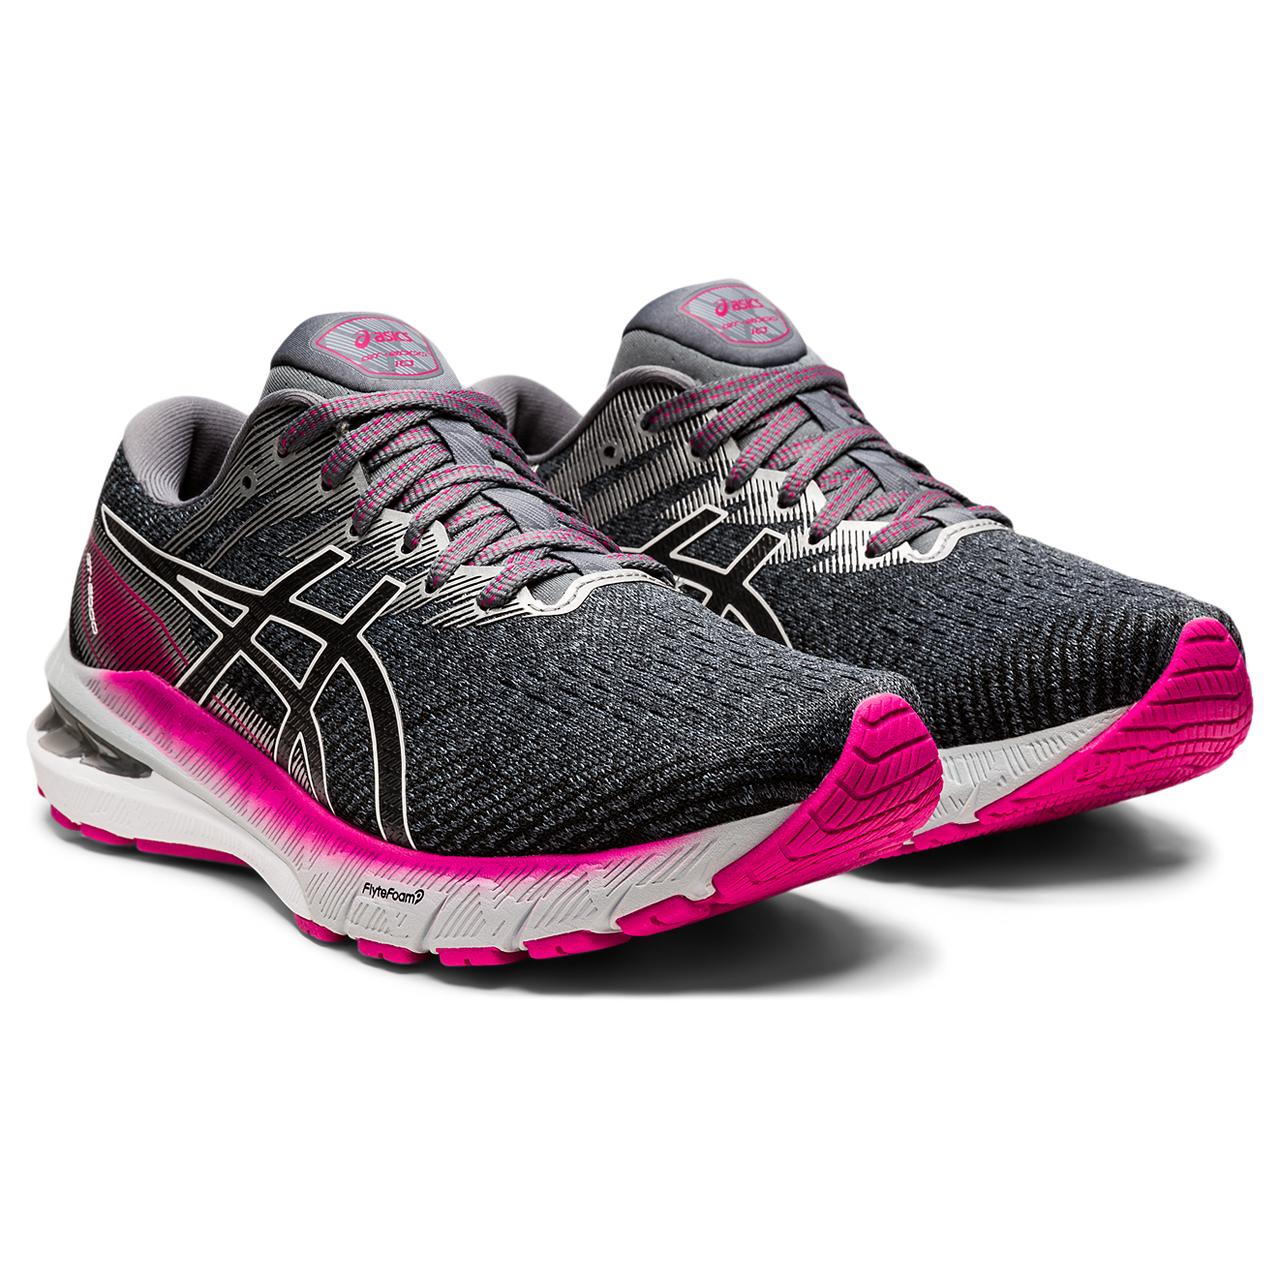 The Women's GT-2000 10 from ASICS is designed to keep your mind and body focused on the road ahead. It's a versatile running style that's great for various distances. No matter if you're looking to stroll around the block or tackle the LA marathon the GT-2000 will be there to support you.